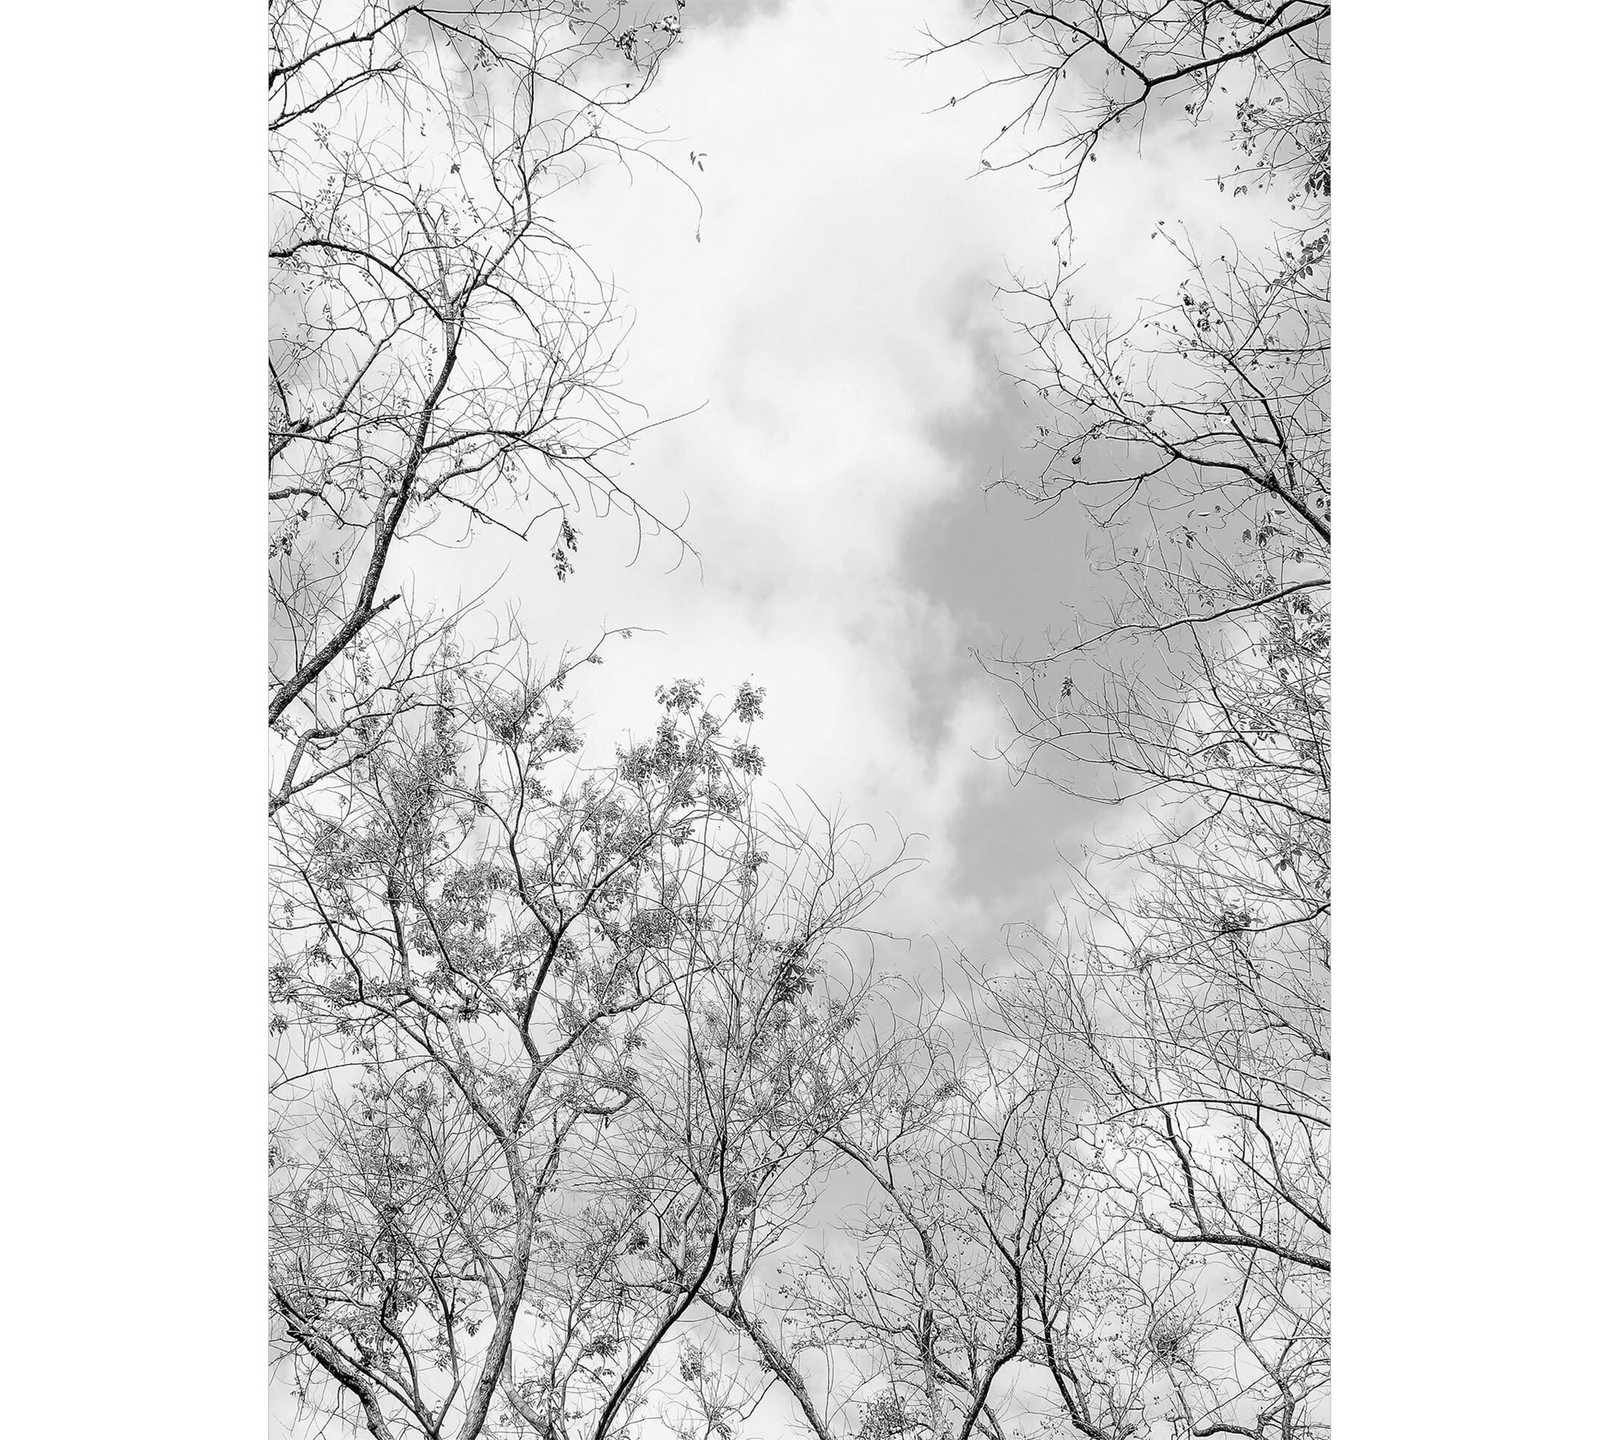         Black and white photo wallpaper trees & sky, portrait format
    